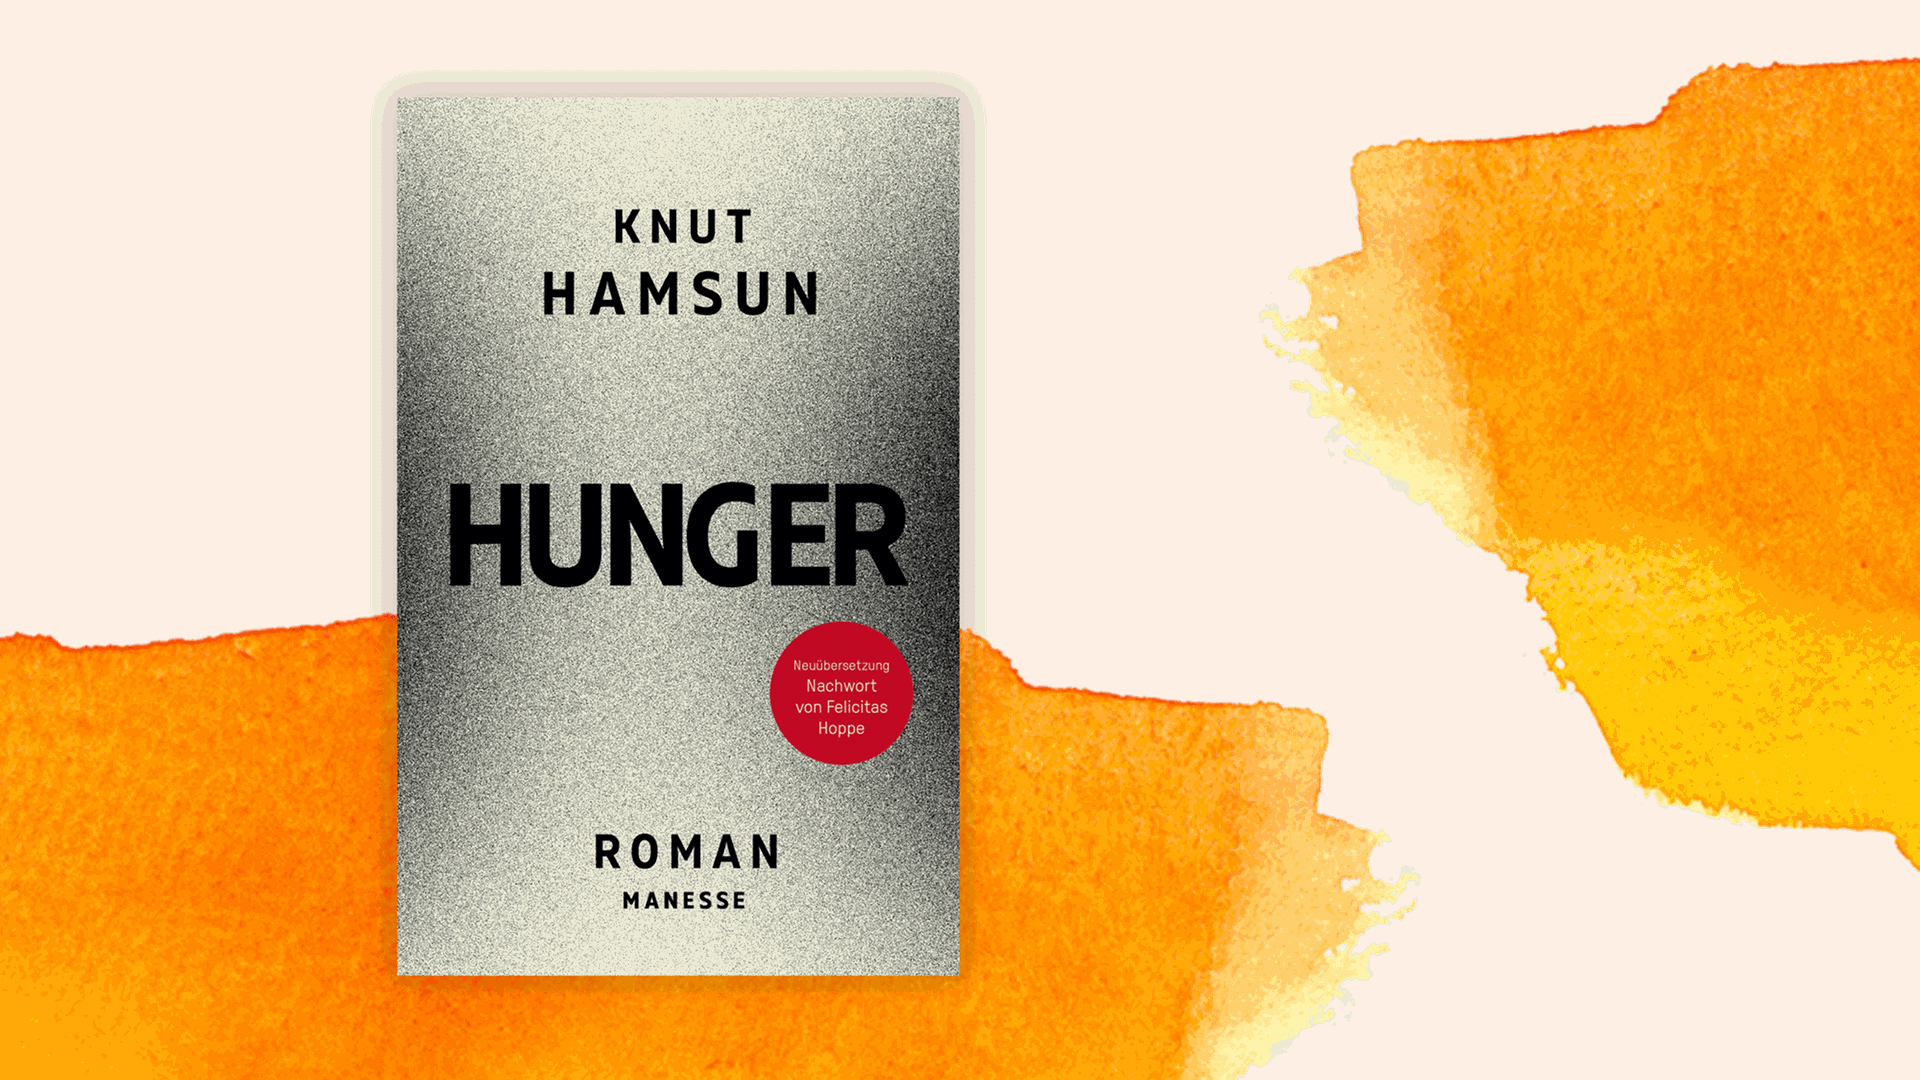 Knut Hamsun: “Hunger” – male, humiliating and full of hatred